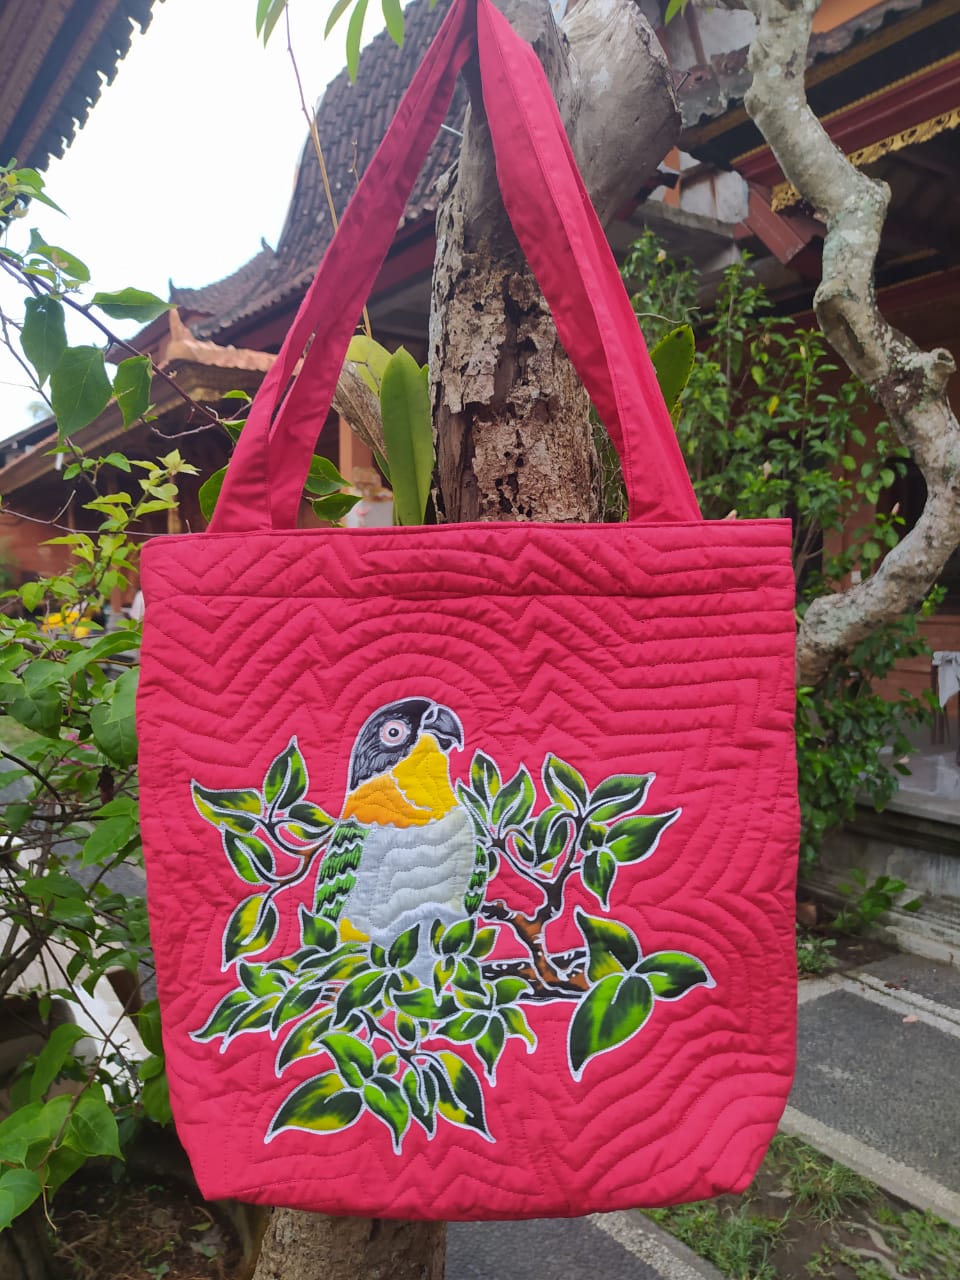 A lovely hand-painted batik tote-style bag with a curious Black-headed Caique set amongst tropical foliage. A unique gift for the caique lover!